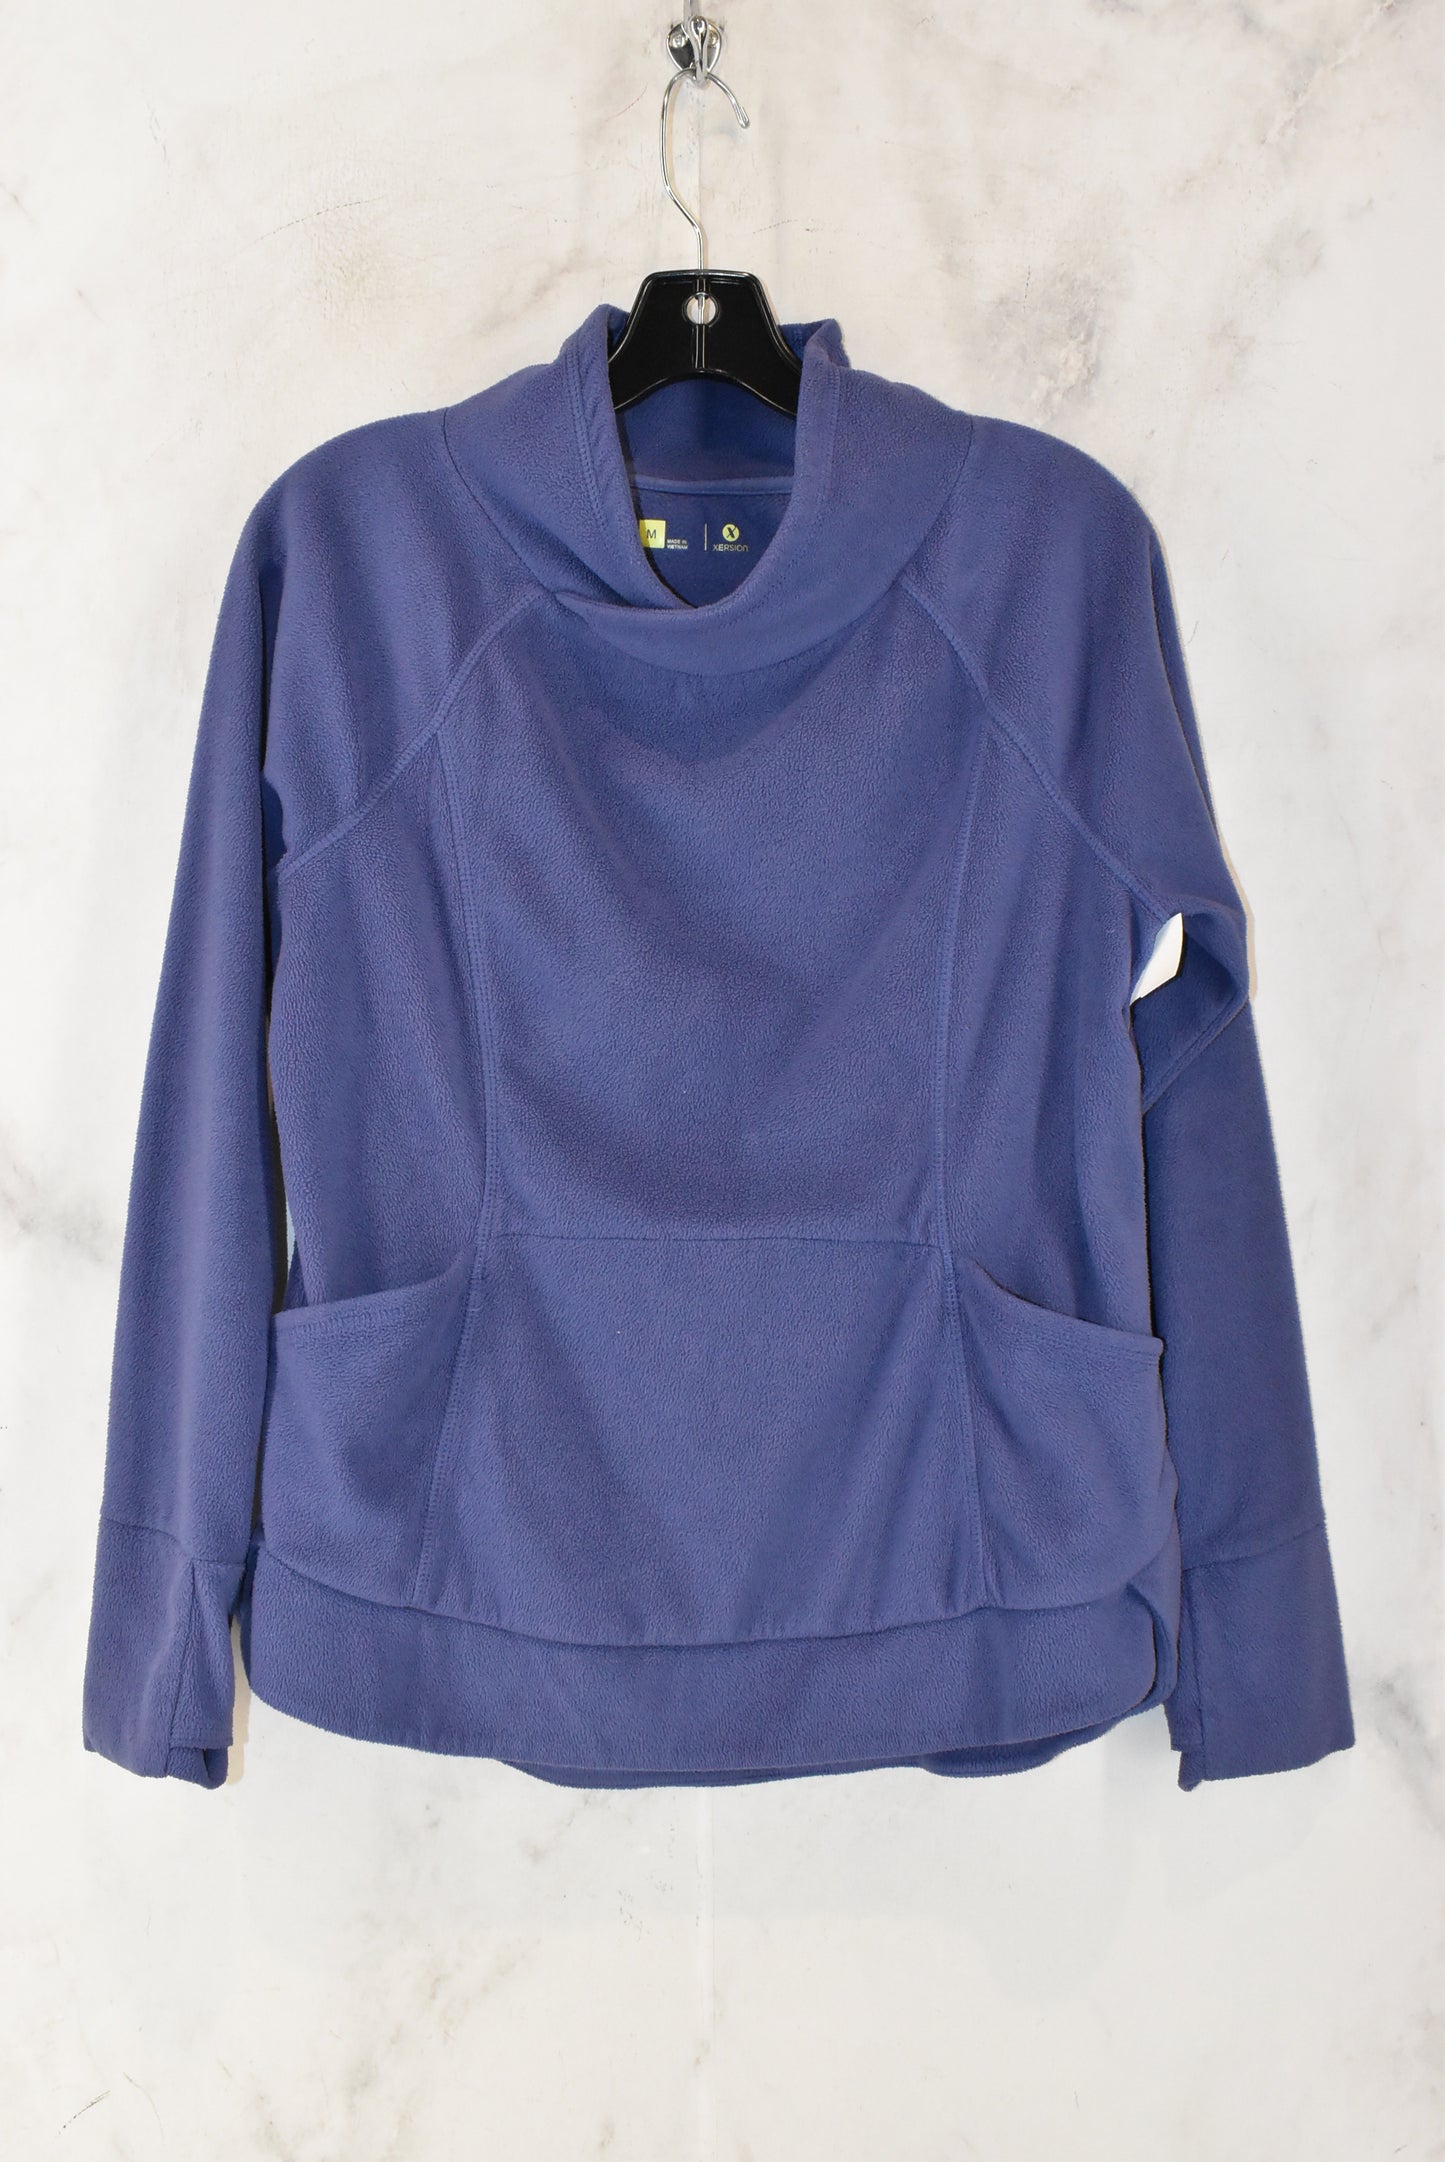 Athletic Fleece By Xersion  Size: M